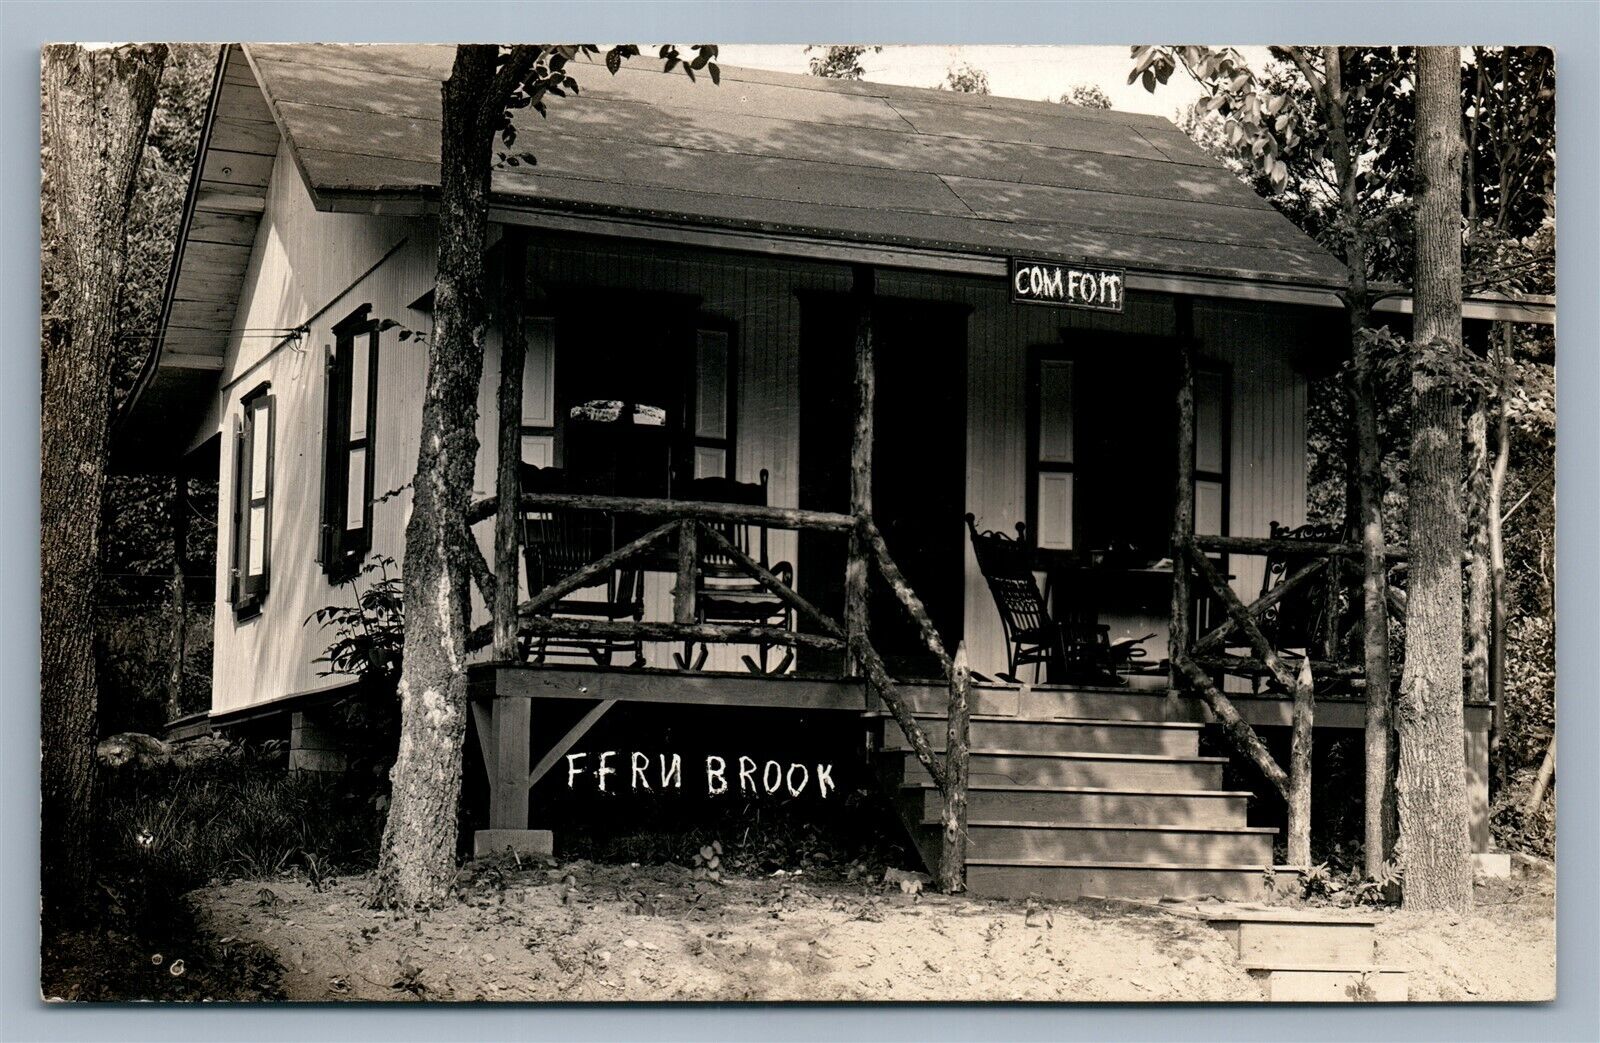 FINLAND PA FERN BROOK COMFORT COTTAGE ANTIQUE REAL PHOTO POSTCARD RPPC